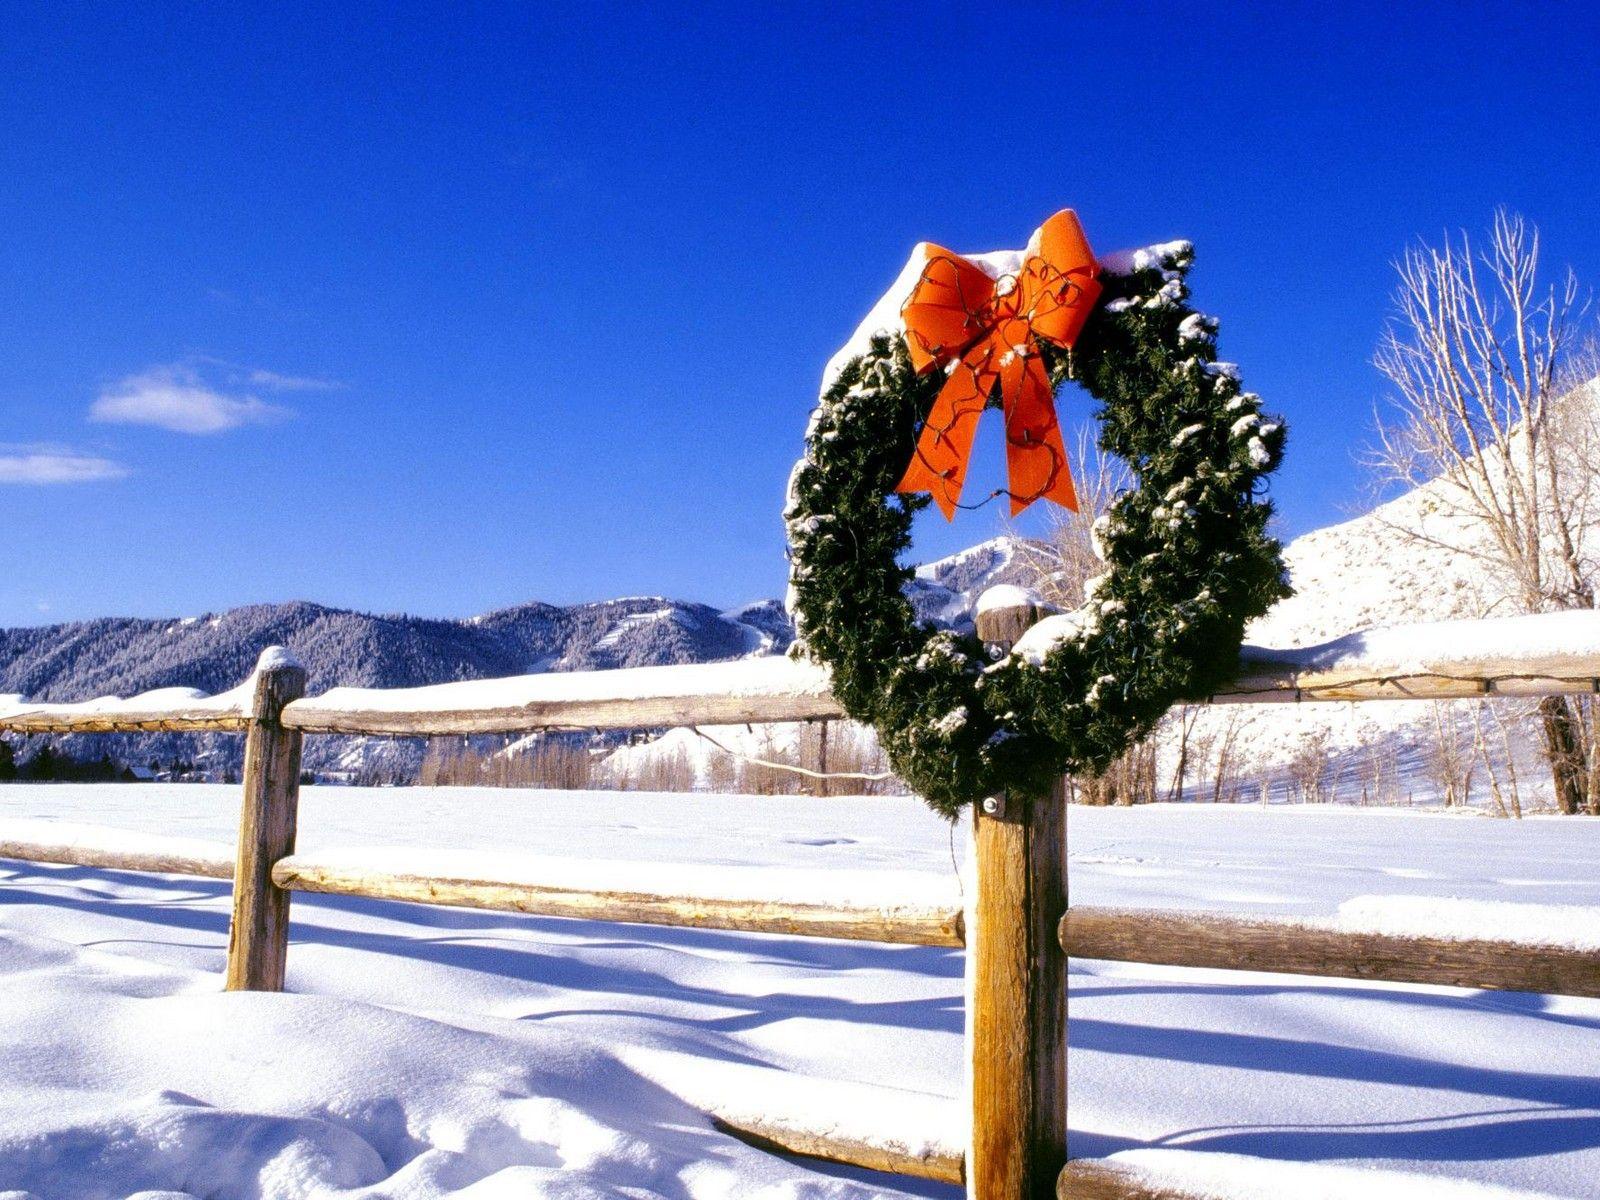 Wreath on a fence on Christmas wallpaper and image